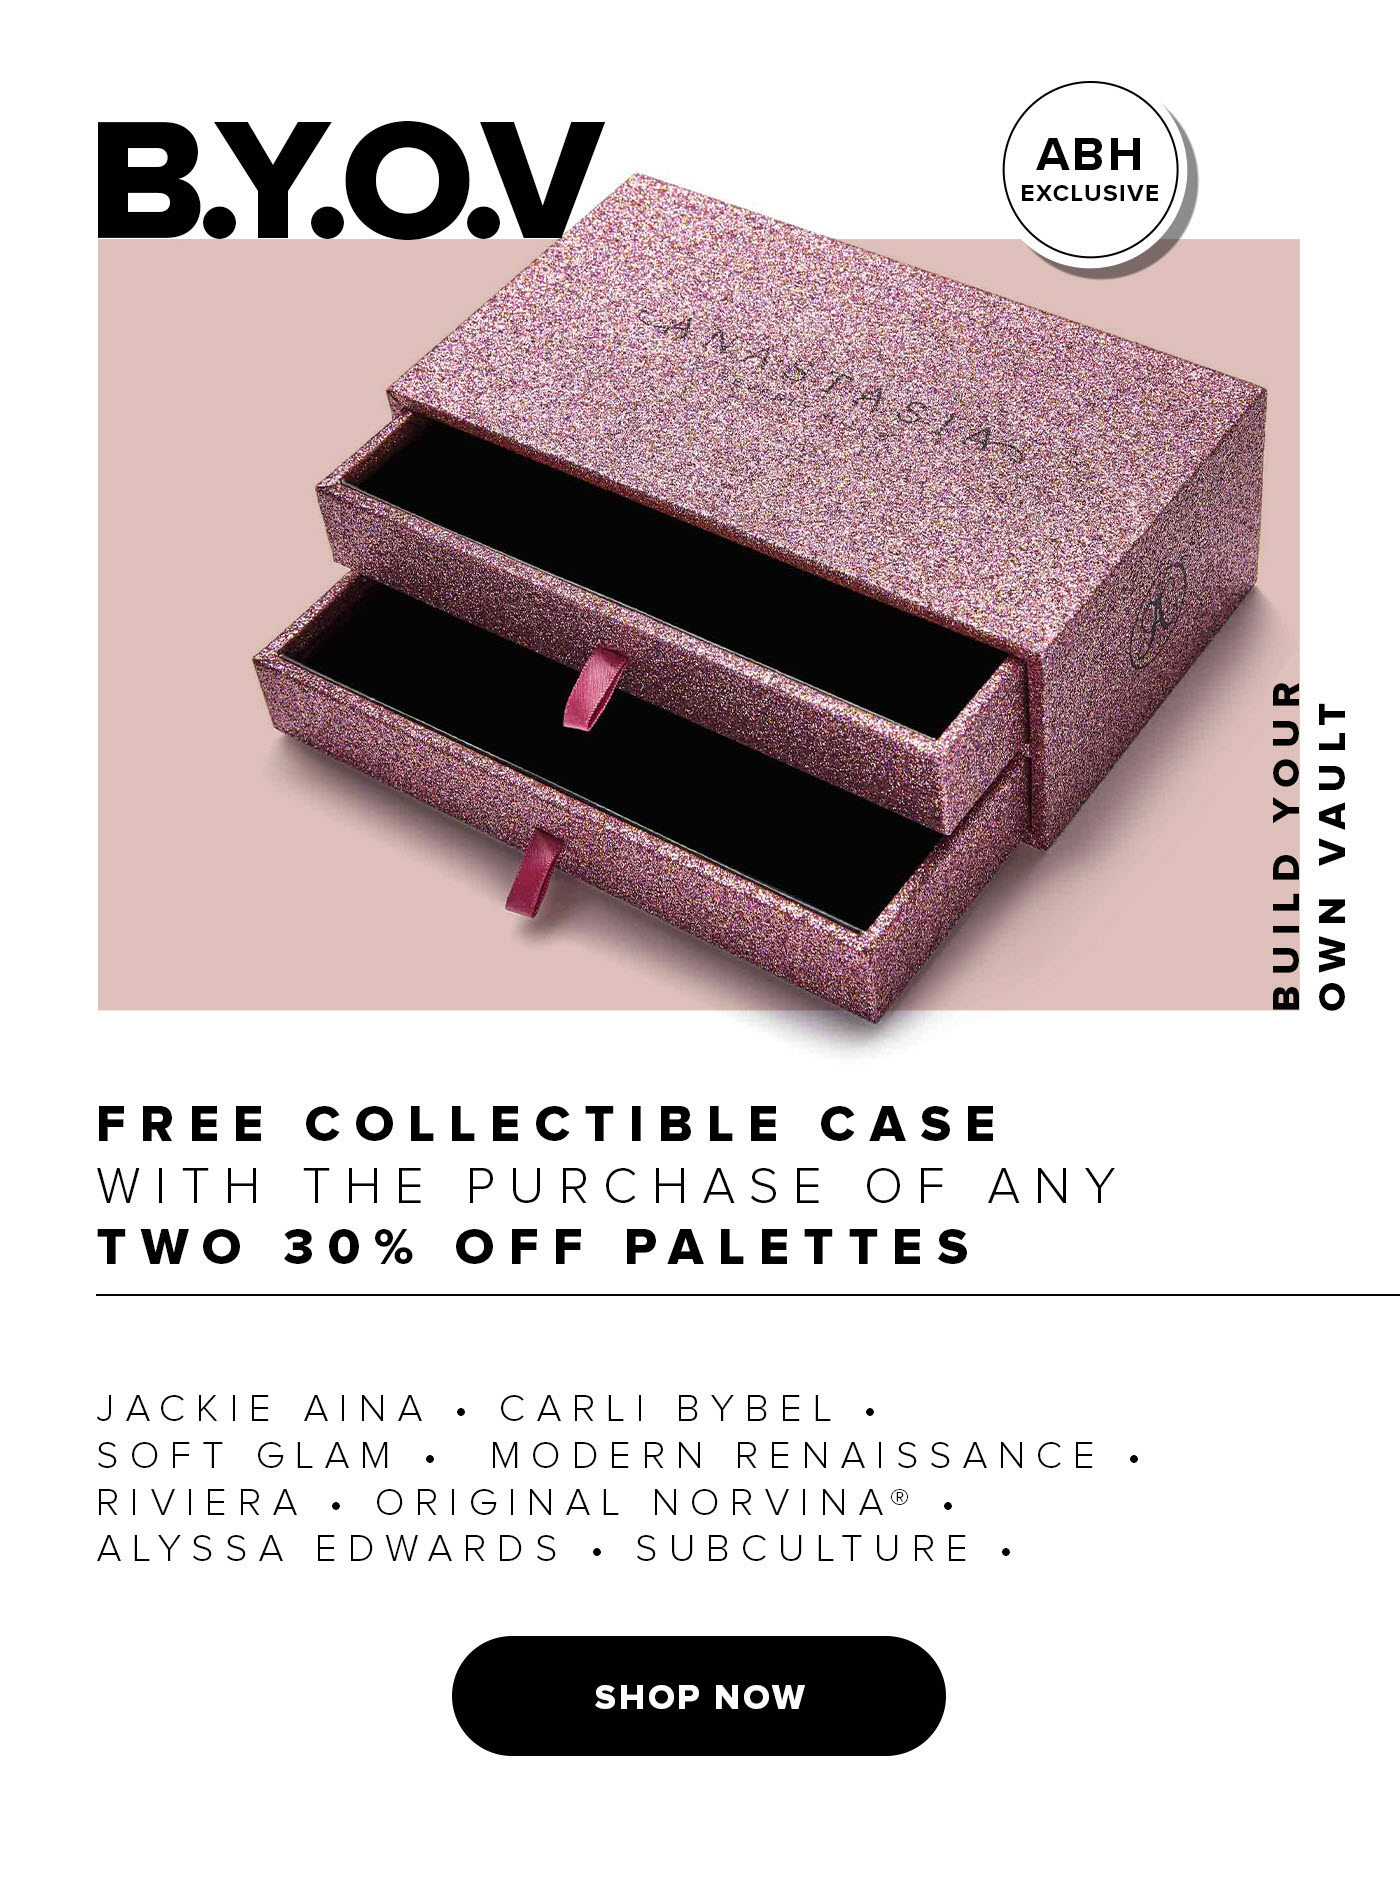 Build Your Own Vault - Free Collectible Case with the Purchase of Any Two 30% OFF Palettes